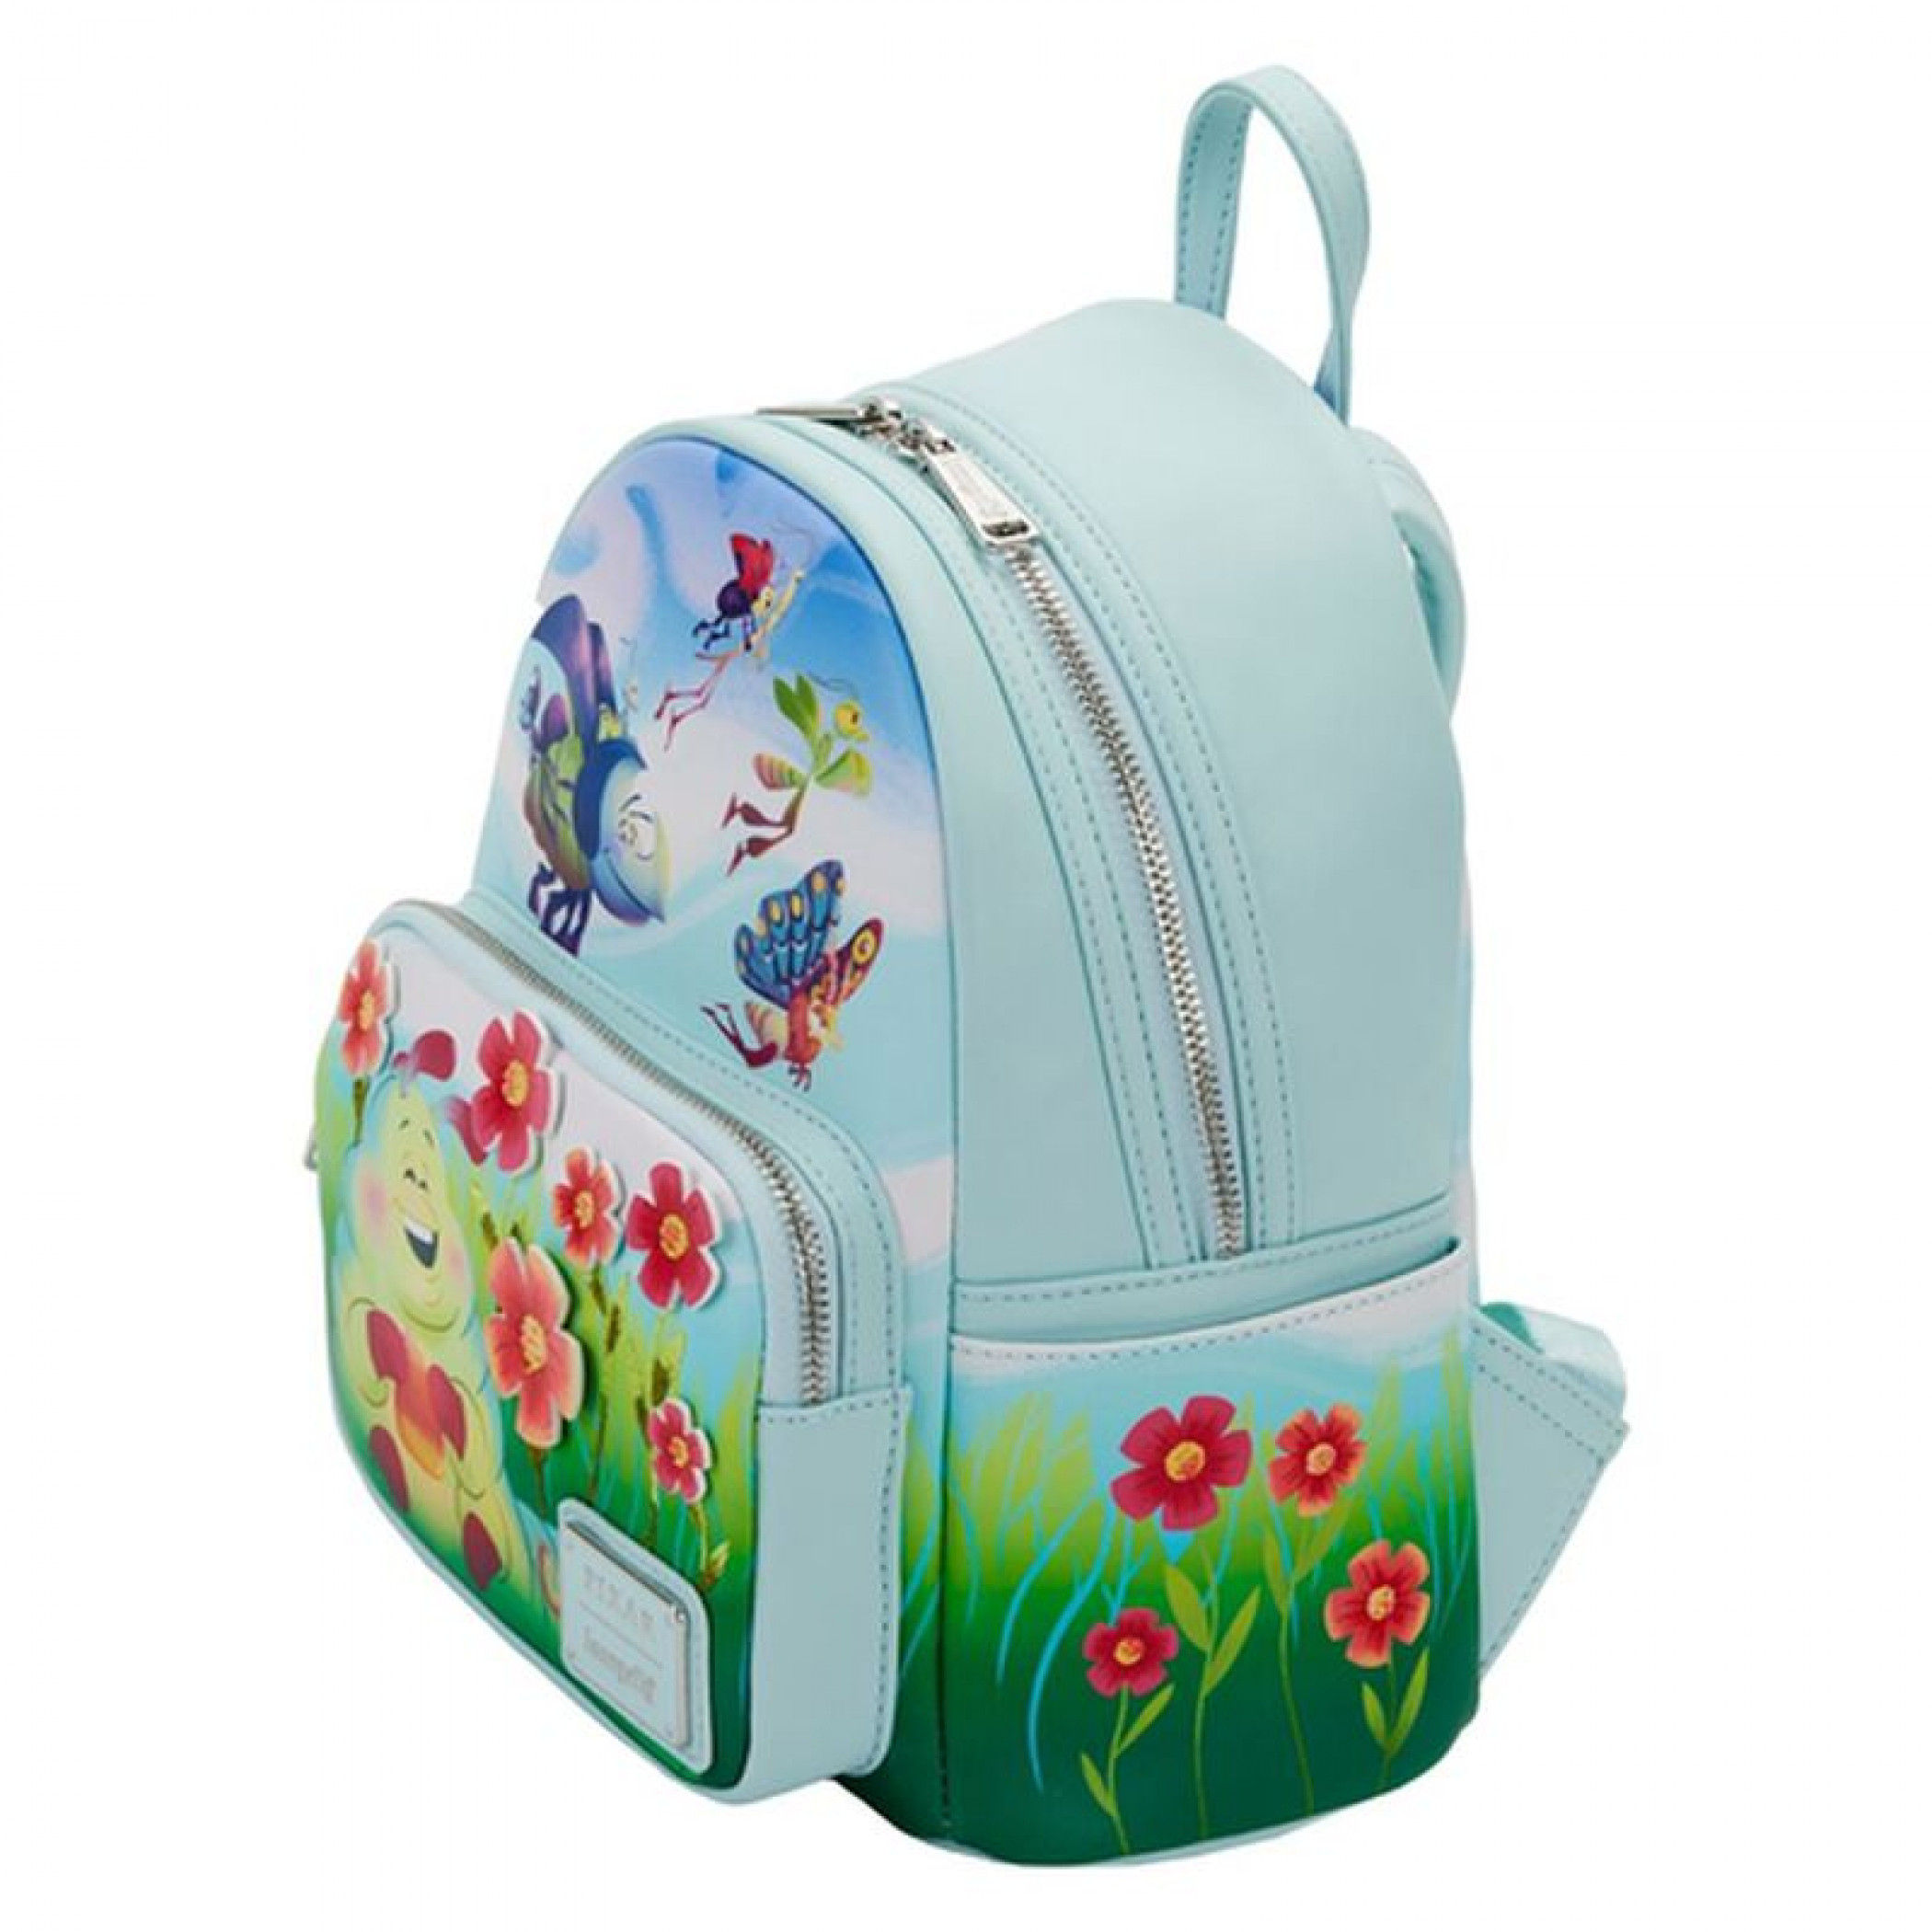 Pixar A Bug's Life Mini Backpack By Loungefly